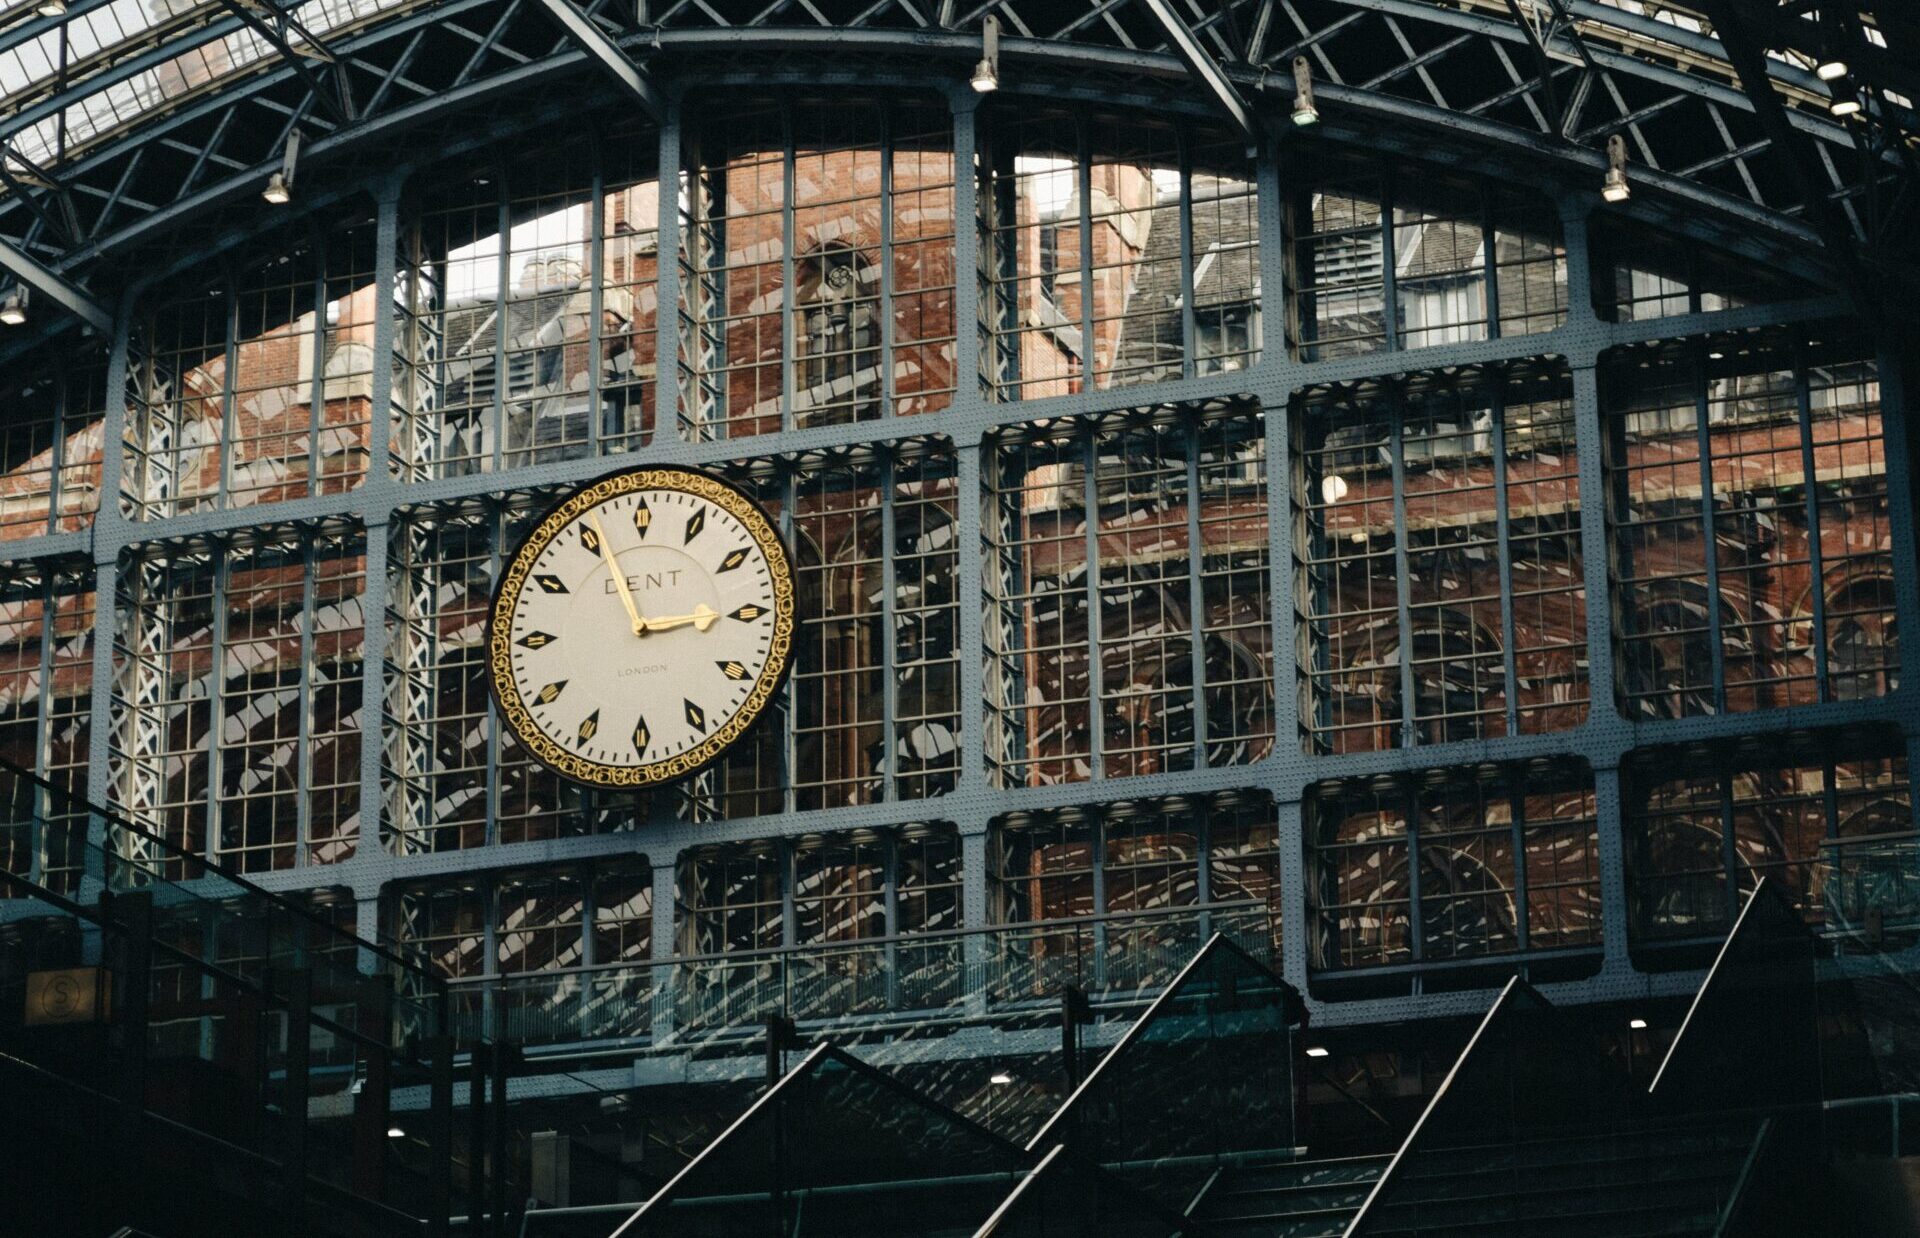 Ornate clock on industrial metal structure